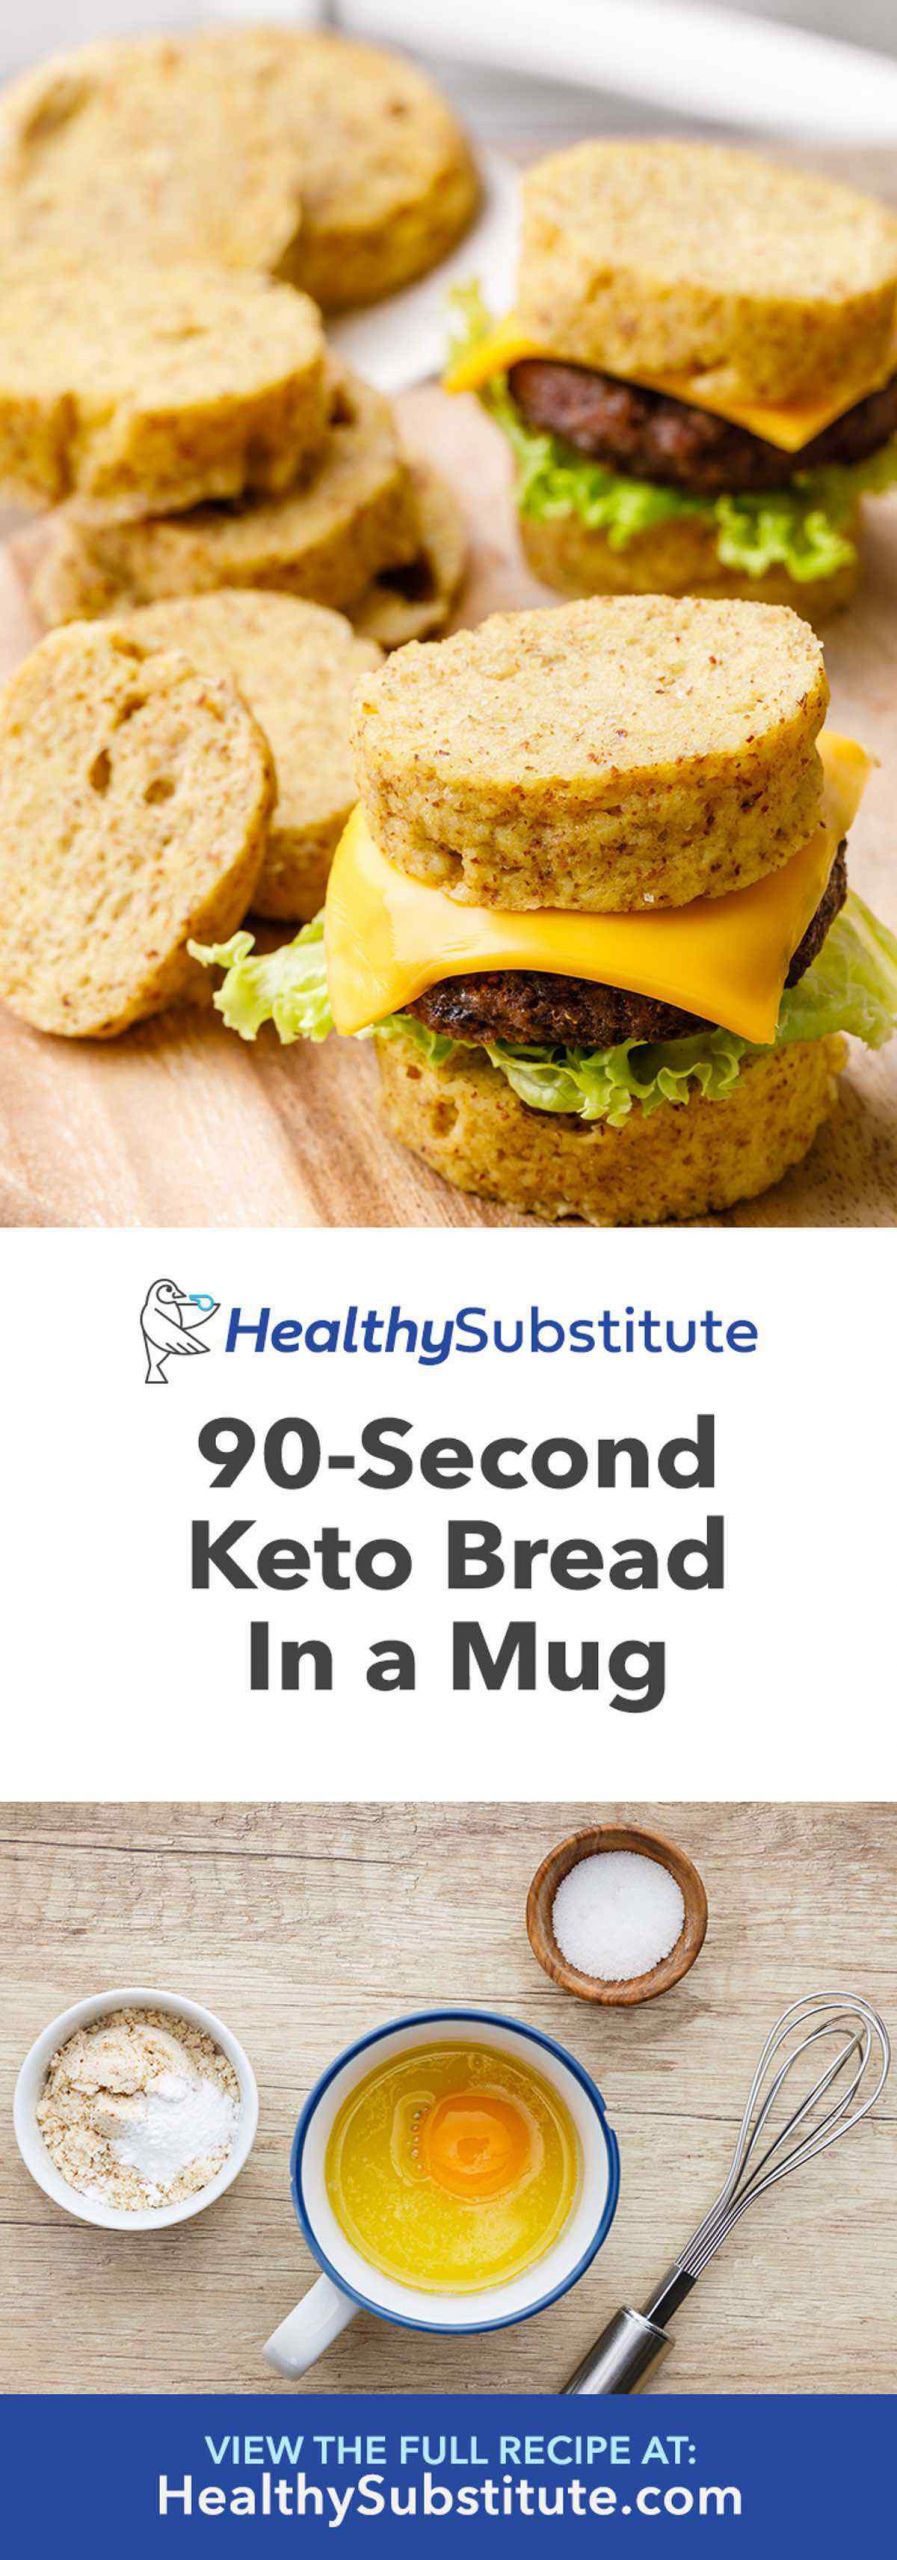 90 Second Keto Bread In A Mug Video
 The Best 90 Second Keto Bread in a Mug Quick and Easy